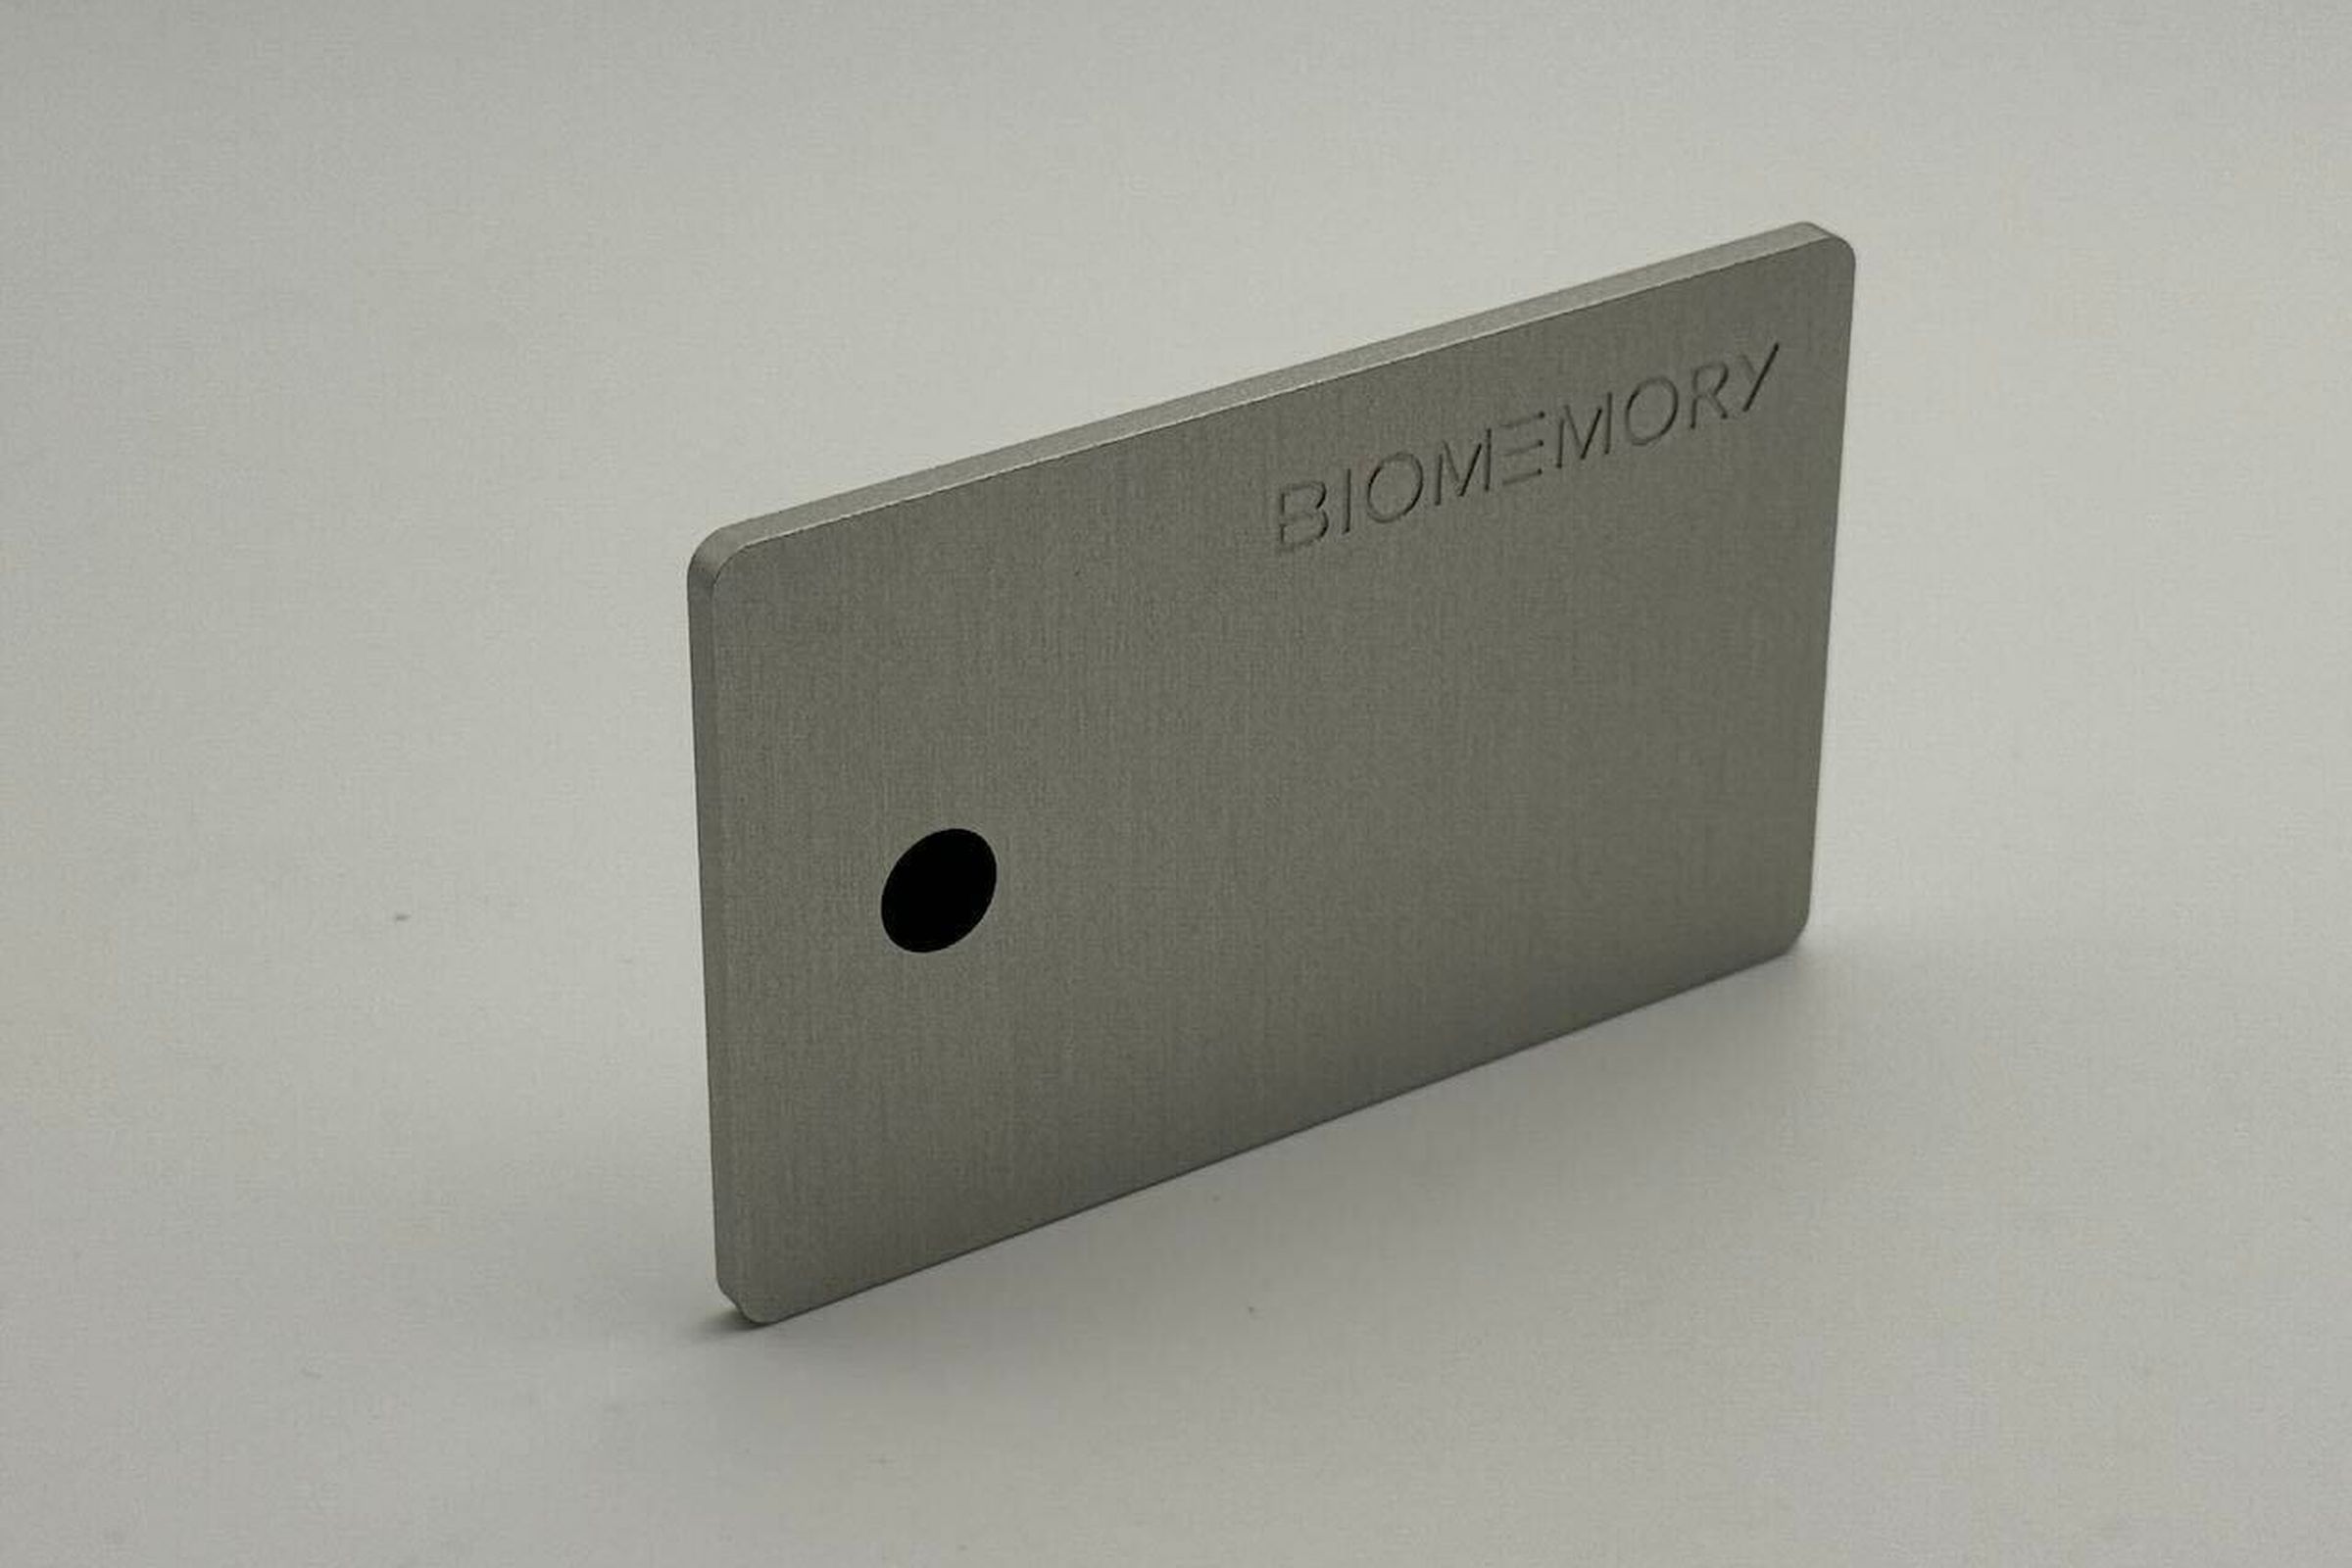 An image showing the Biomemory card